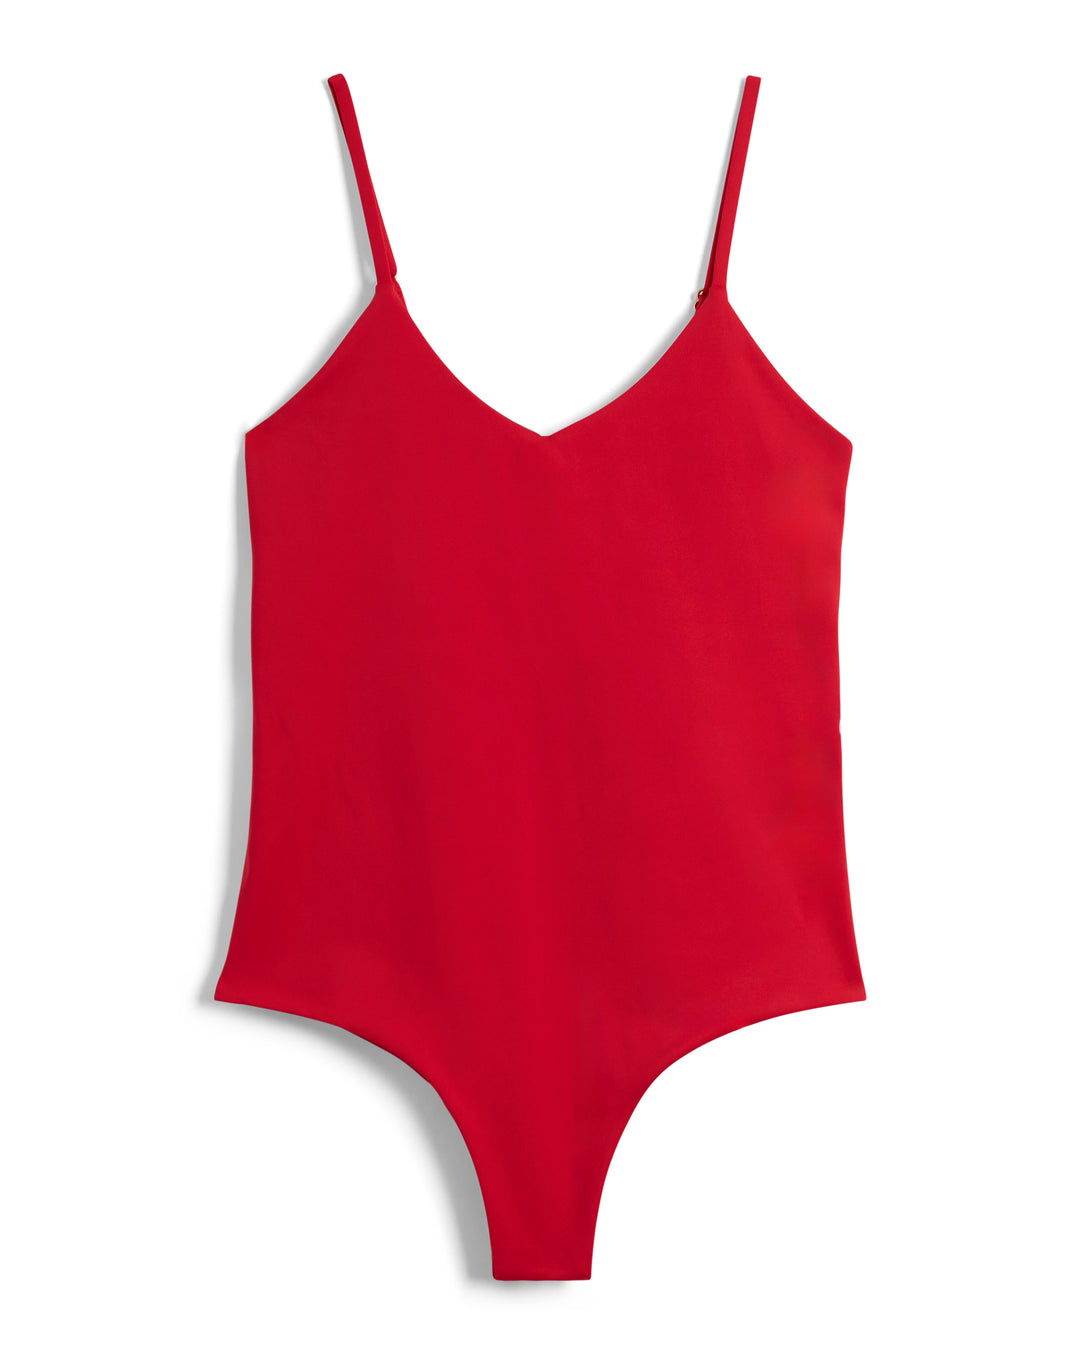 Introducing **The Deia One Piece - Pico** by **Dandy Del Mar**: a red sleeveless bodysuit with thin straps and a V-neck design, featuring a high-cut cheeky design. Part of our women's swim collection, it's showcased on a plain white background.